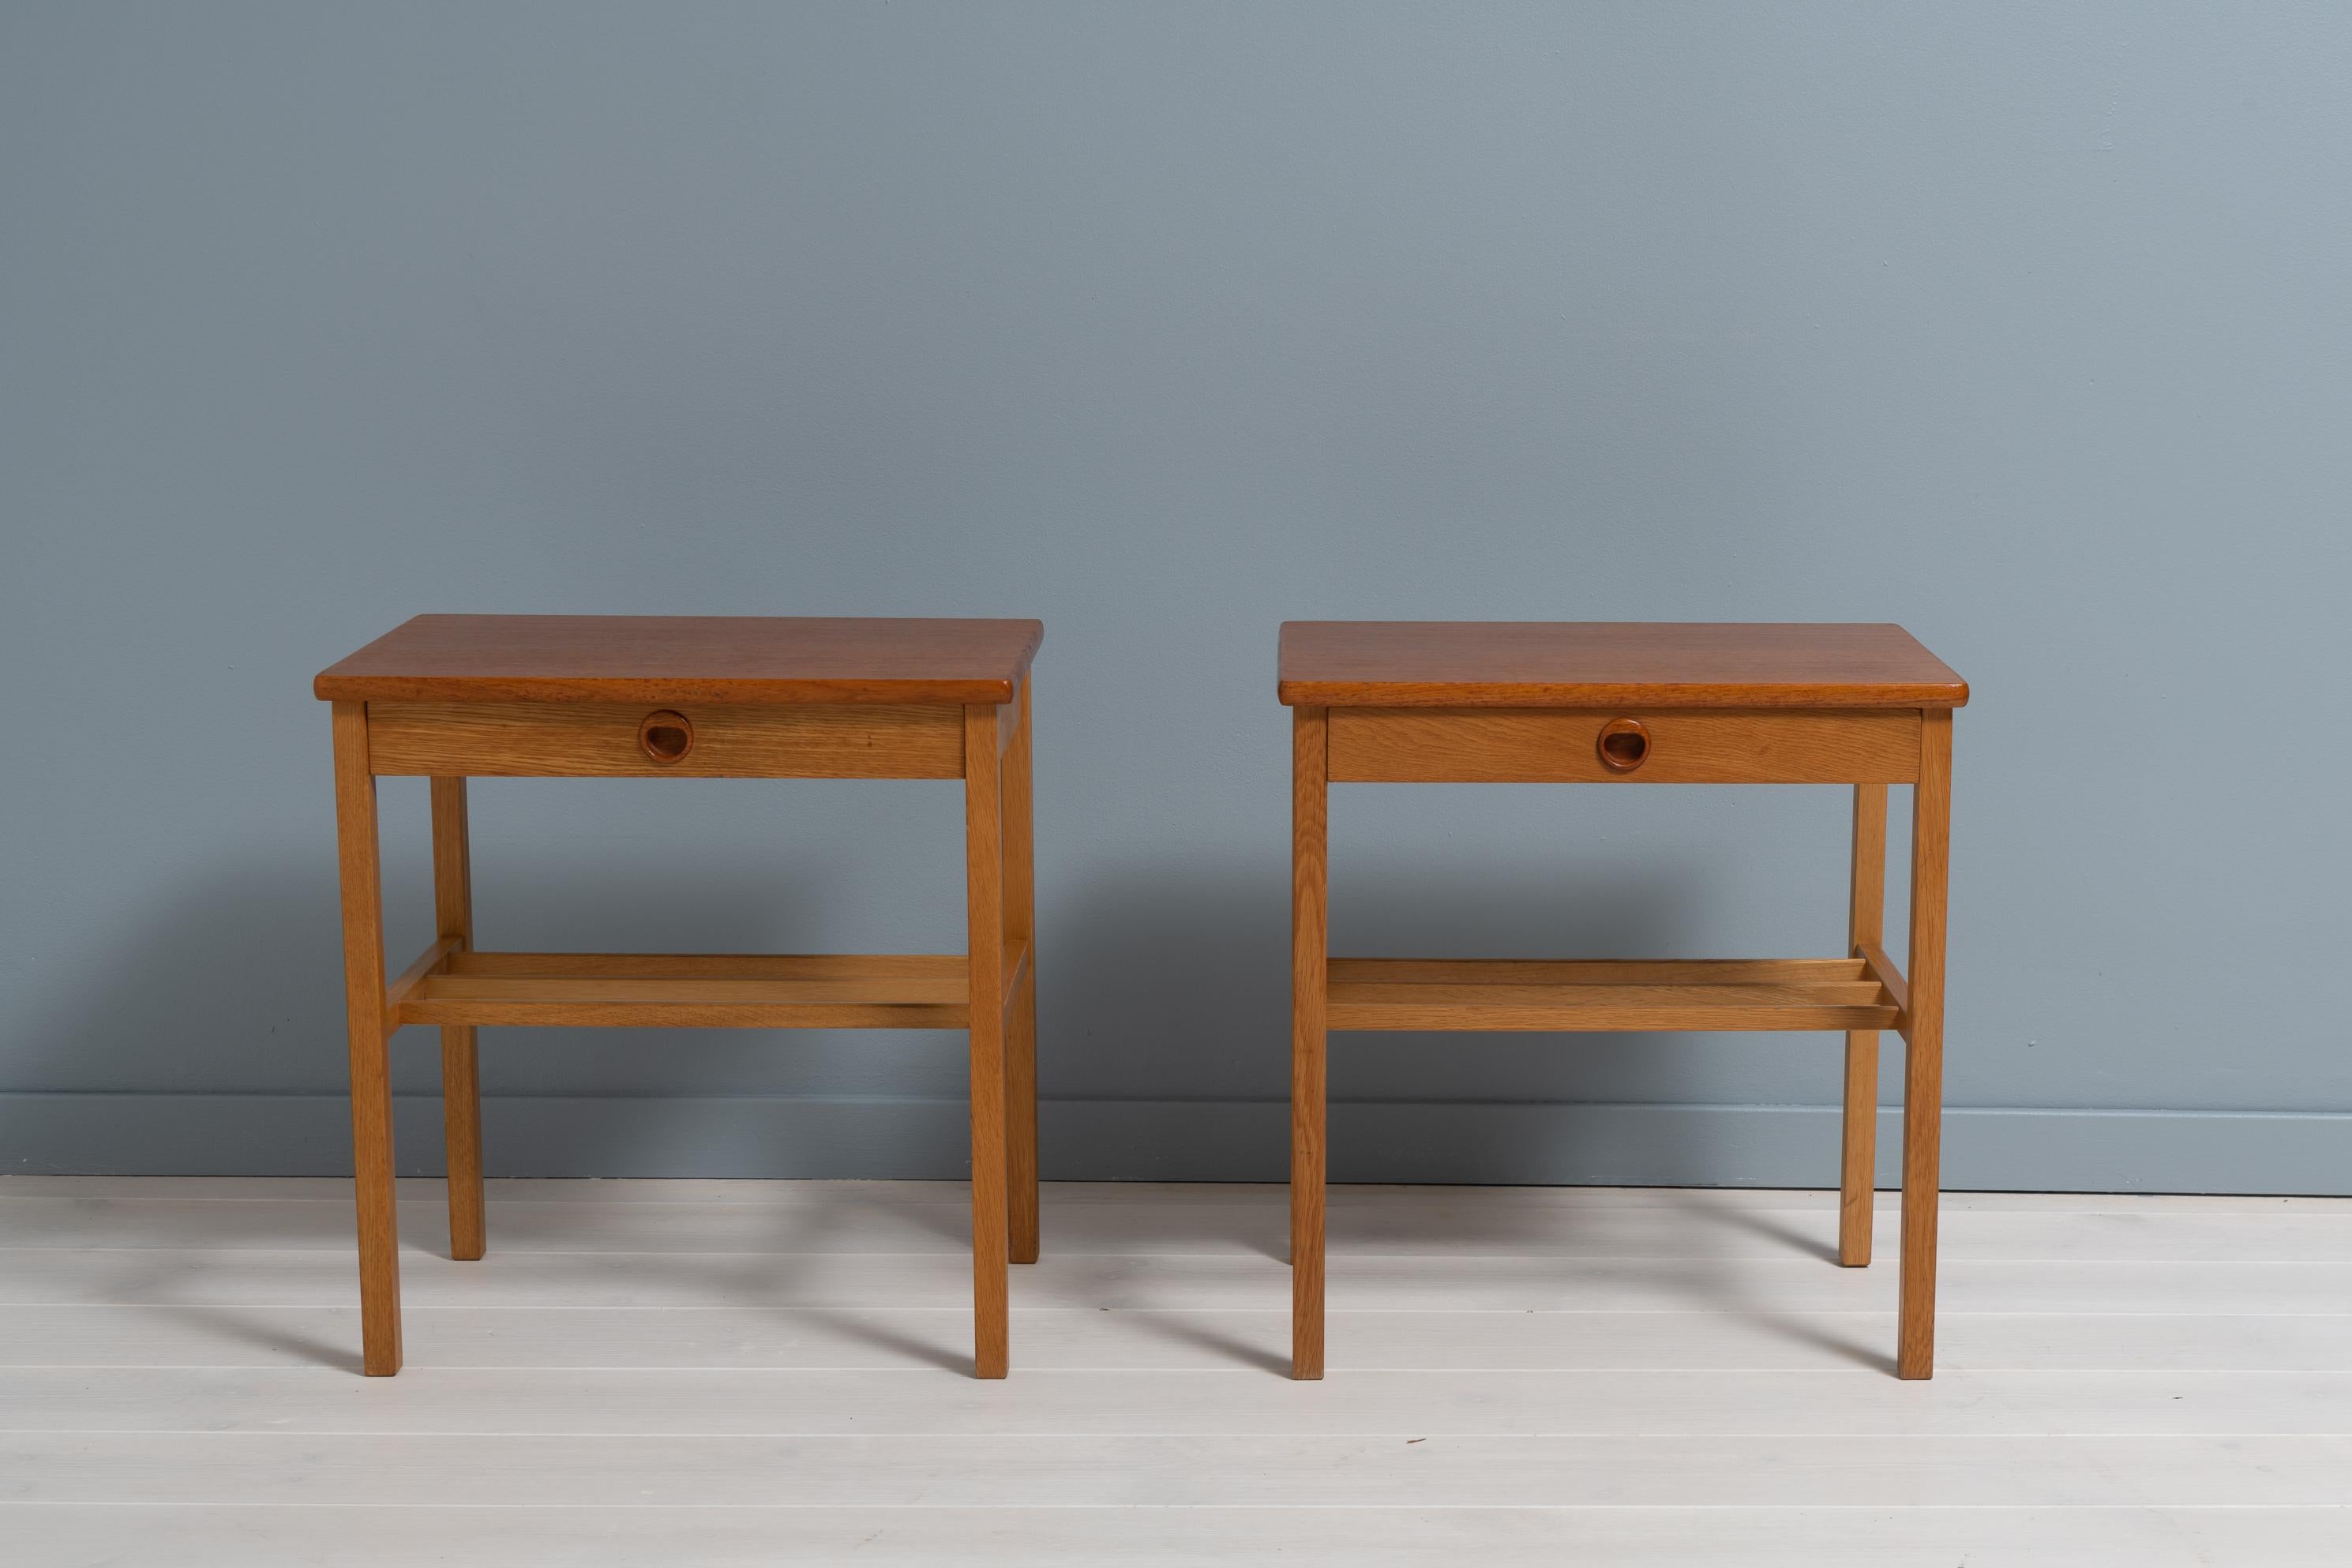 Pair of Scandinavian modern nightstands from Sweden made during the mid 20th century, around 1950. The nightstands are veneered with teak and oak. Good vintage condition consistent with age and use. A pair of nightstands are an easy way to add more